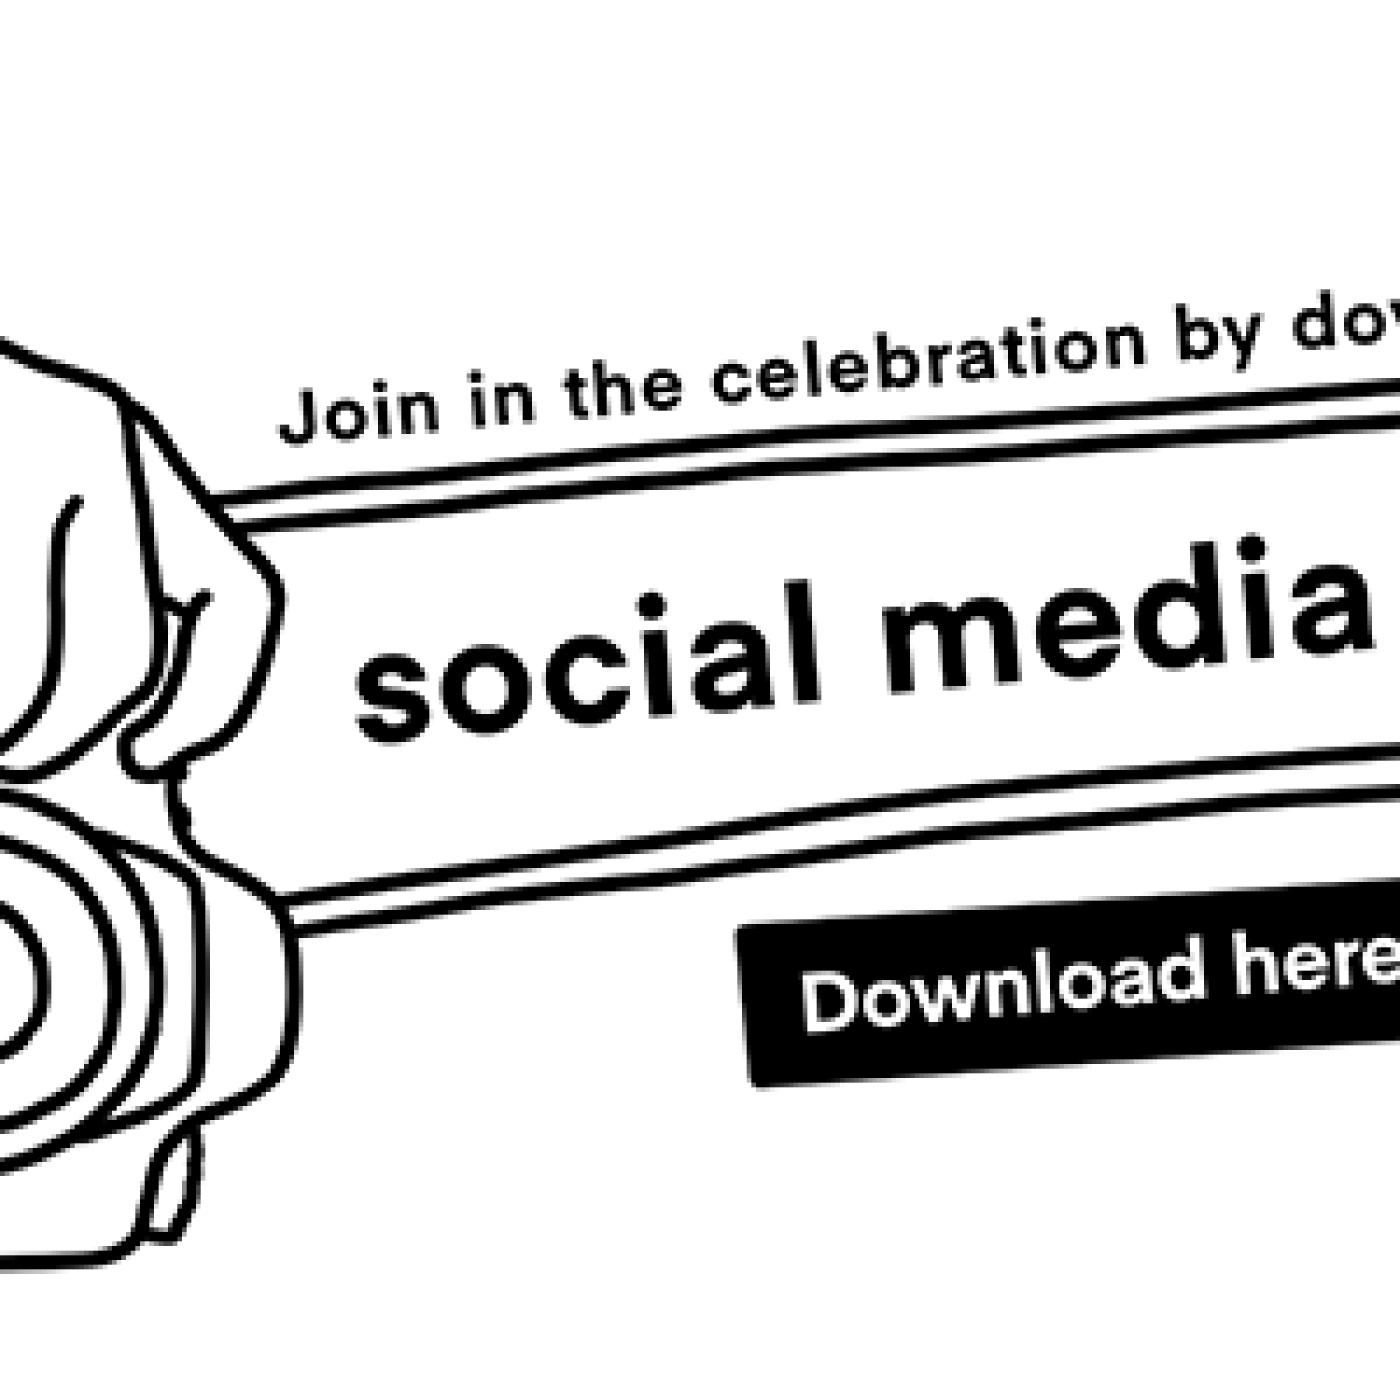 Join the celebration by downloading our social media toolkit | #DemocracyDay